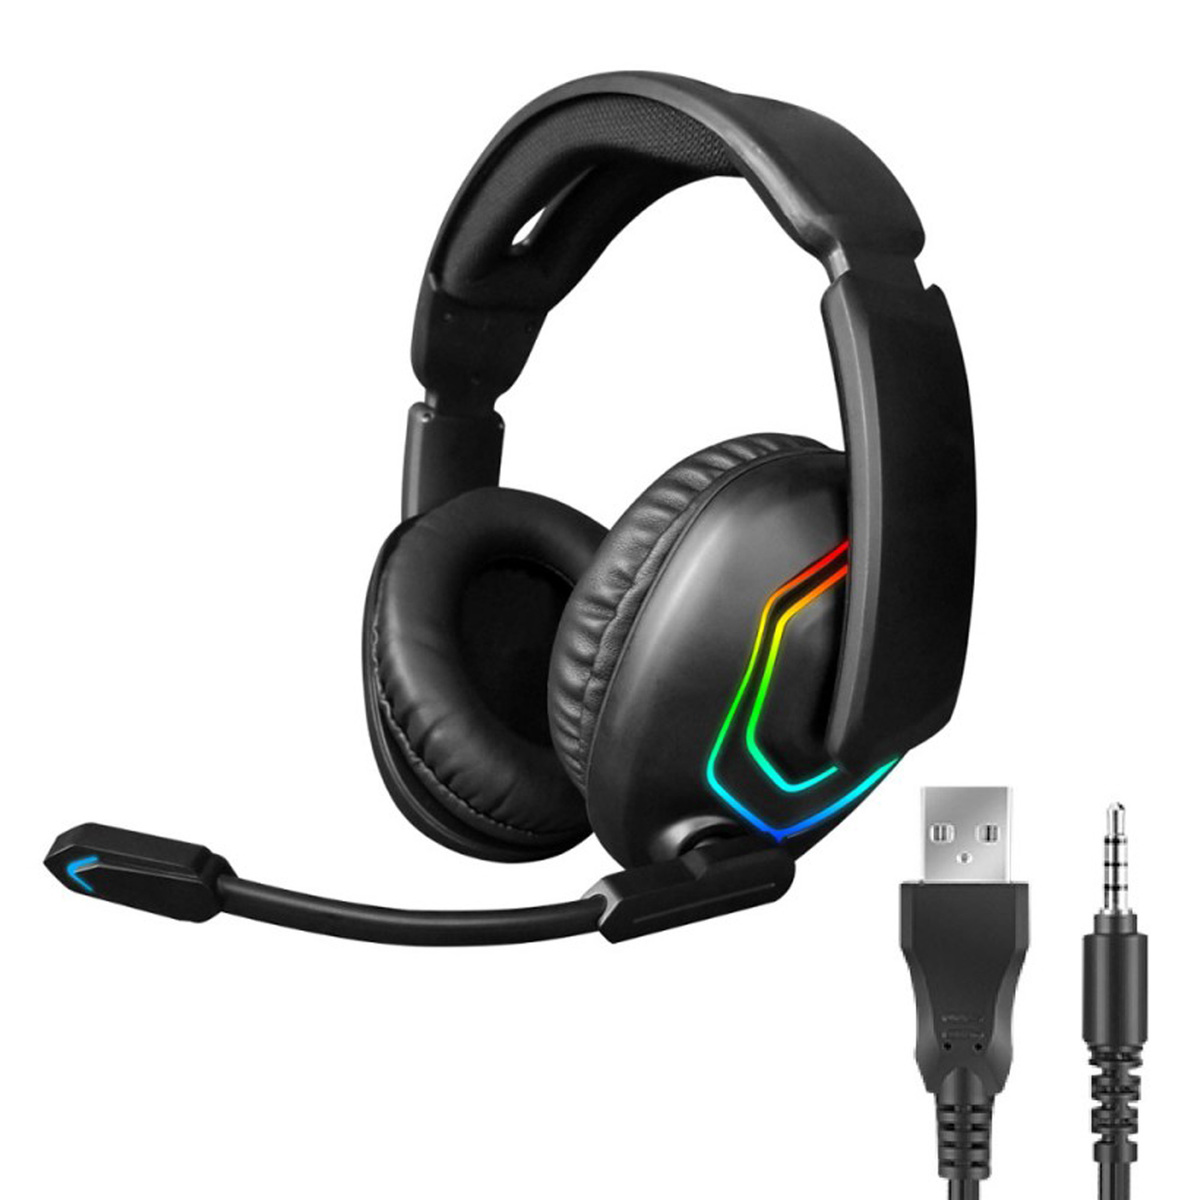 Trands Wired RGB Gaming Headset with Mic, Black, TR-HS917